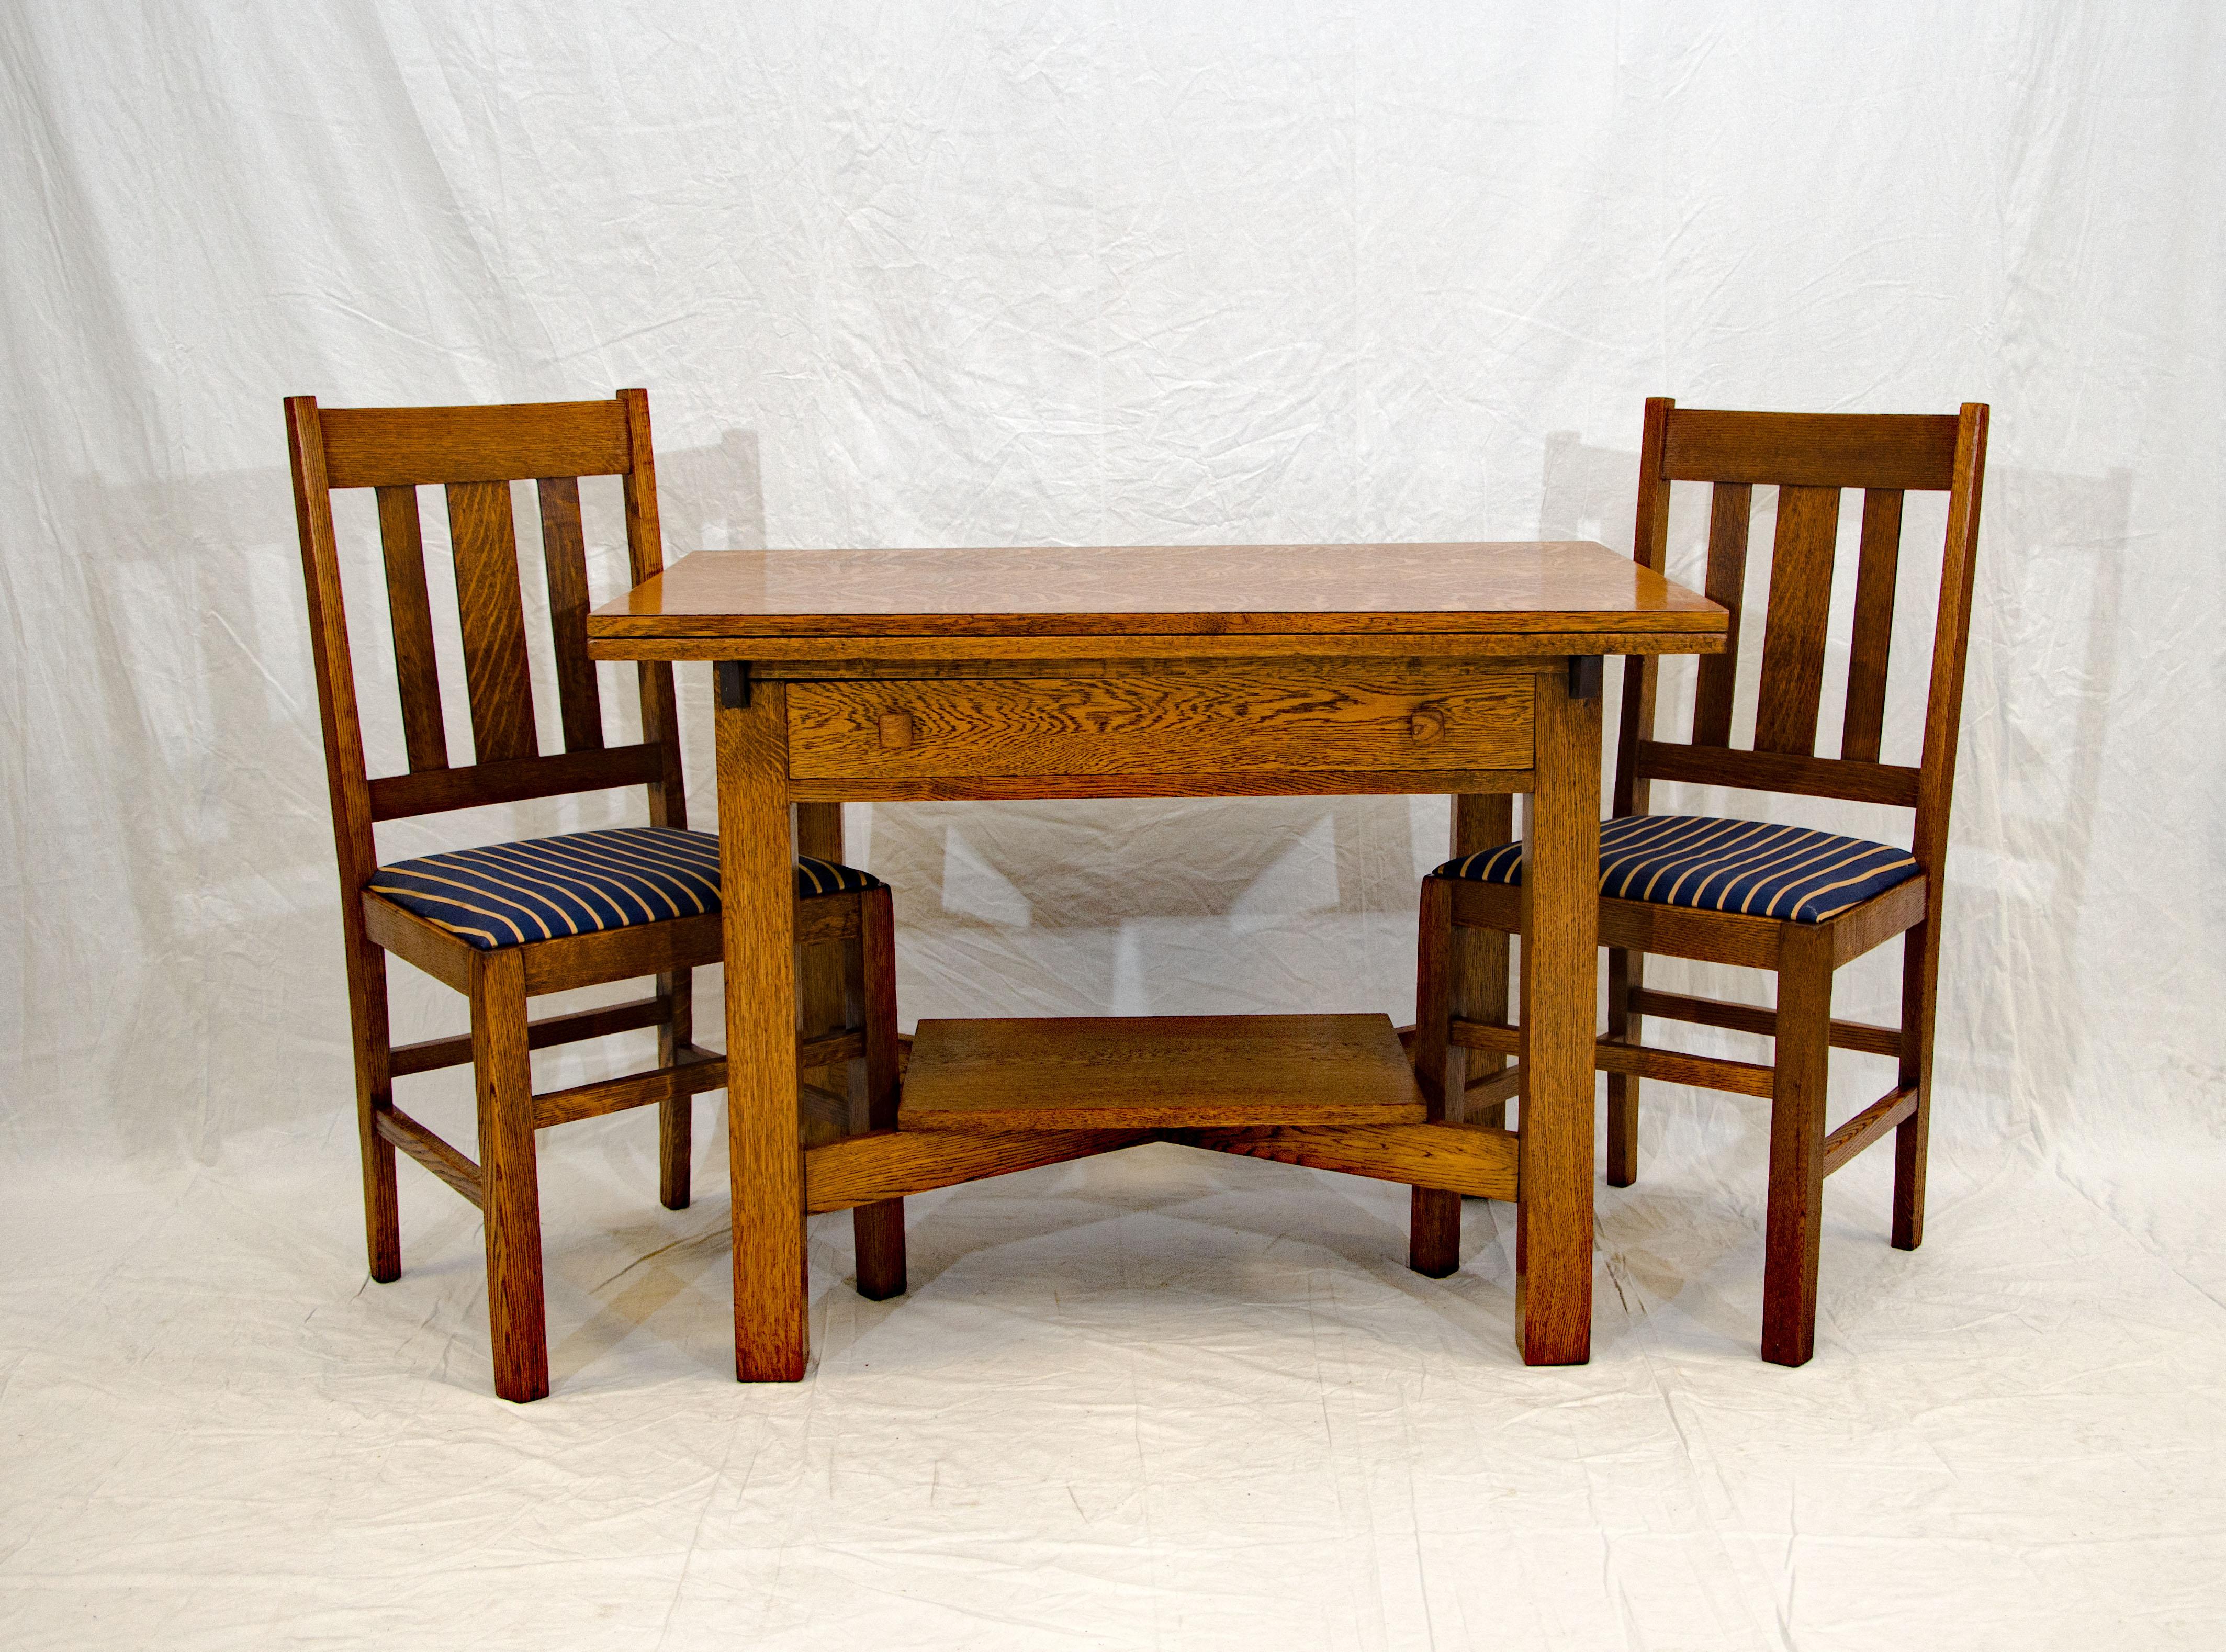 Nice Art & Crafts mission style library table with two pull-out extensions to enable use as a breakfast table or a desk. Each extension is 9 1/2